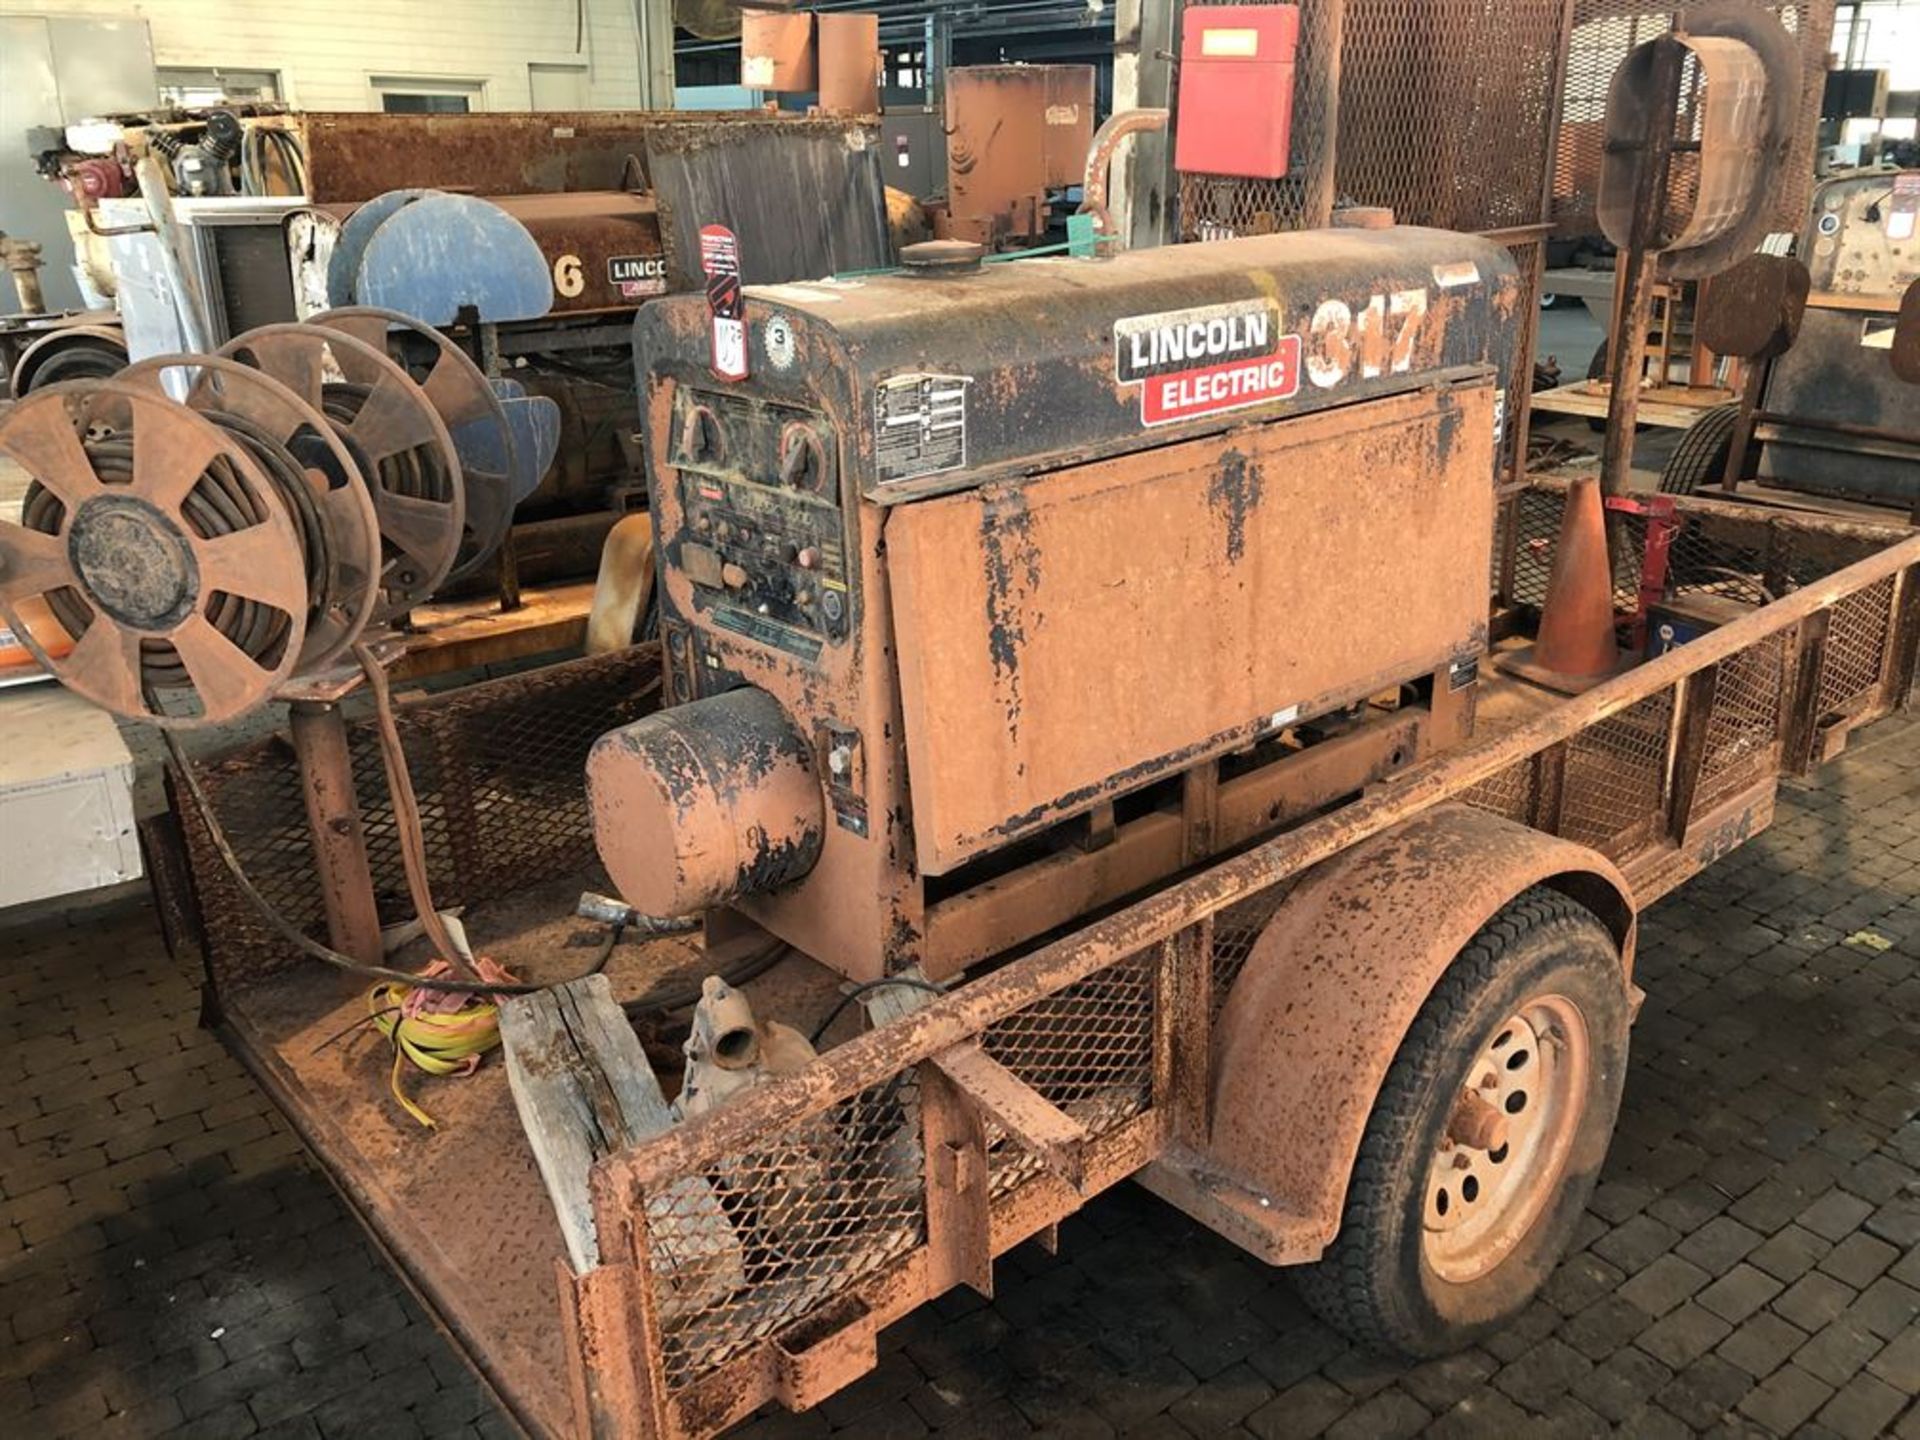 Lot Comprising of R&D Trailer, w/ Lincoln Classic 300D Welding Power Source Generator, s/n